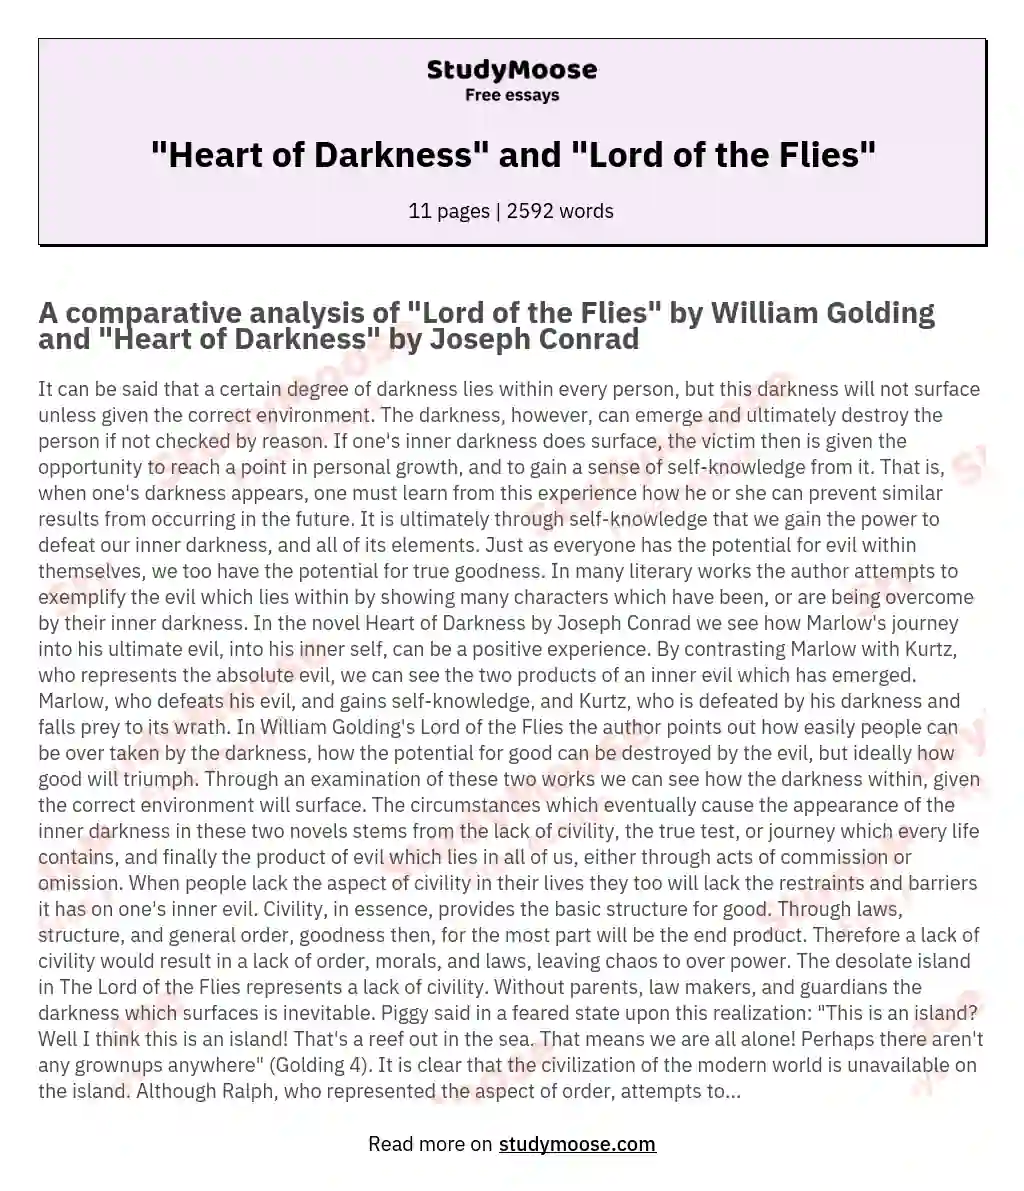 "Heart of Darkness" and "Lord of the Flies" essay